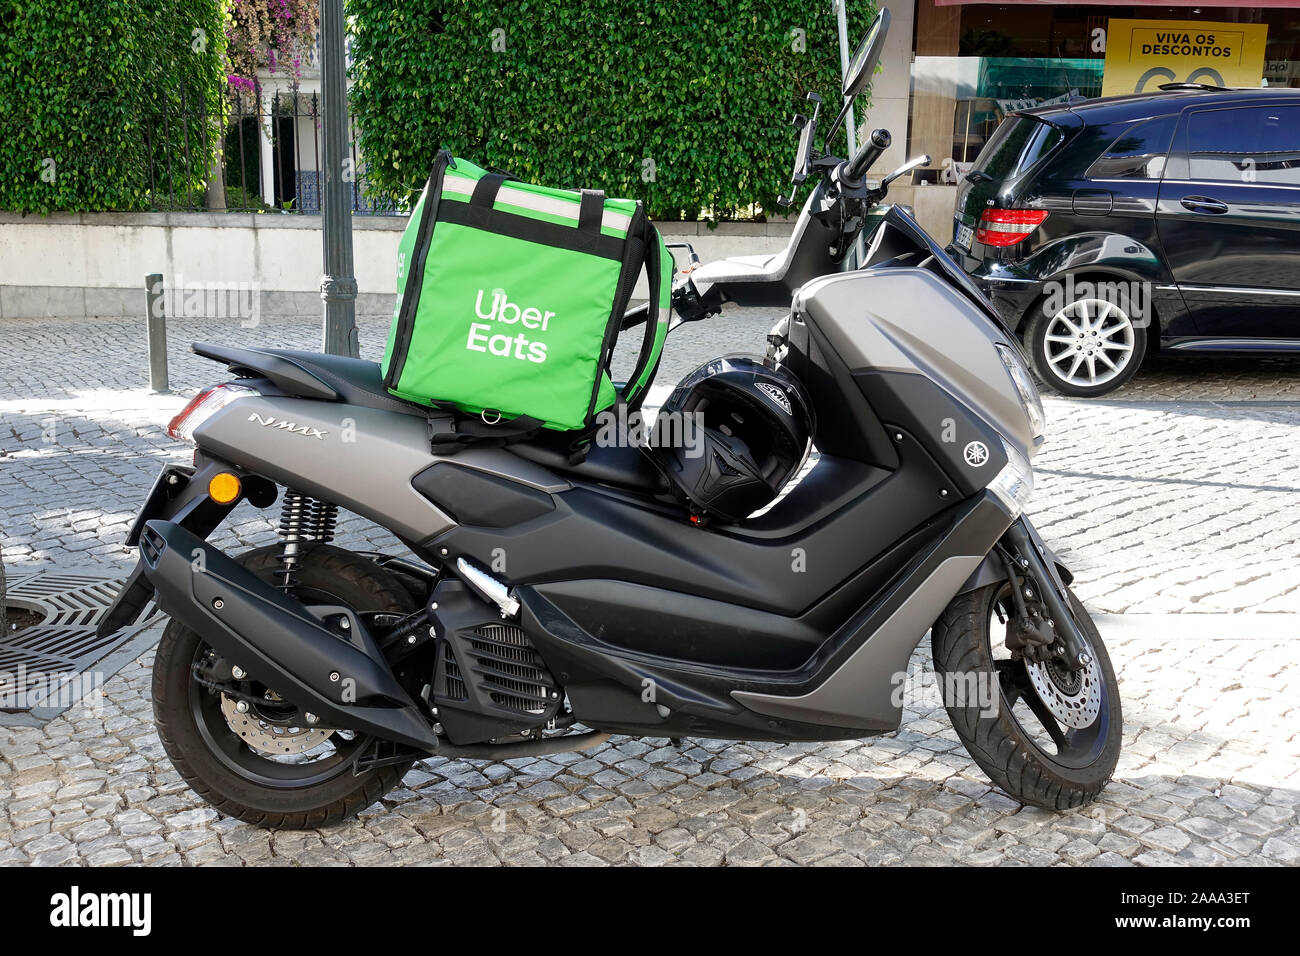 Uber Eats Hot Food Home Delivery Bag Backpack On A Motorcycle In Cascais Portugal Stock Photo